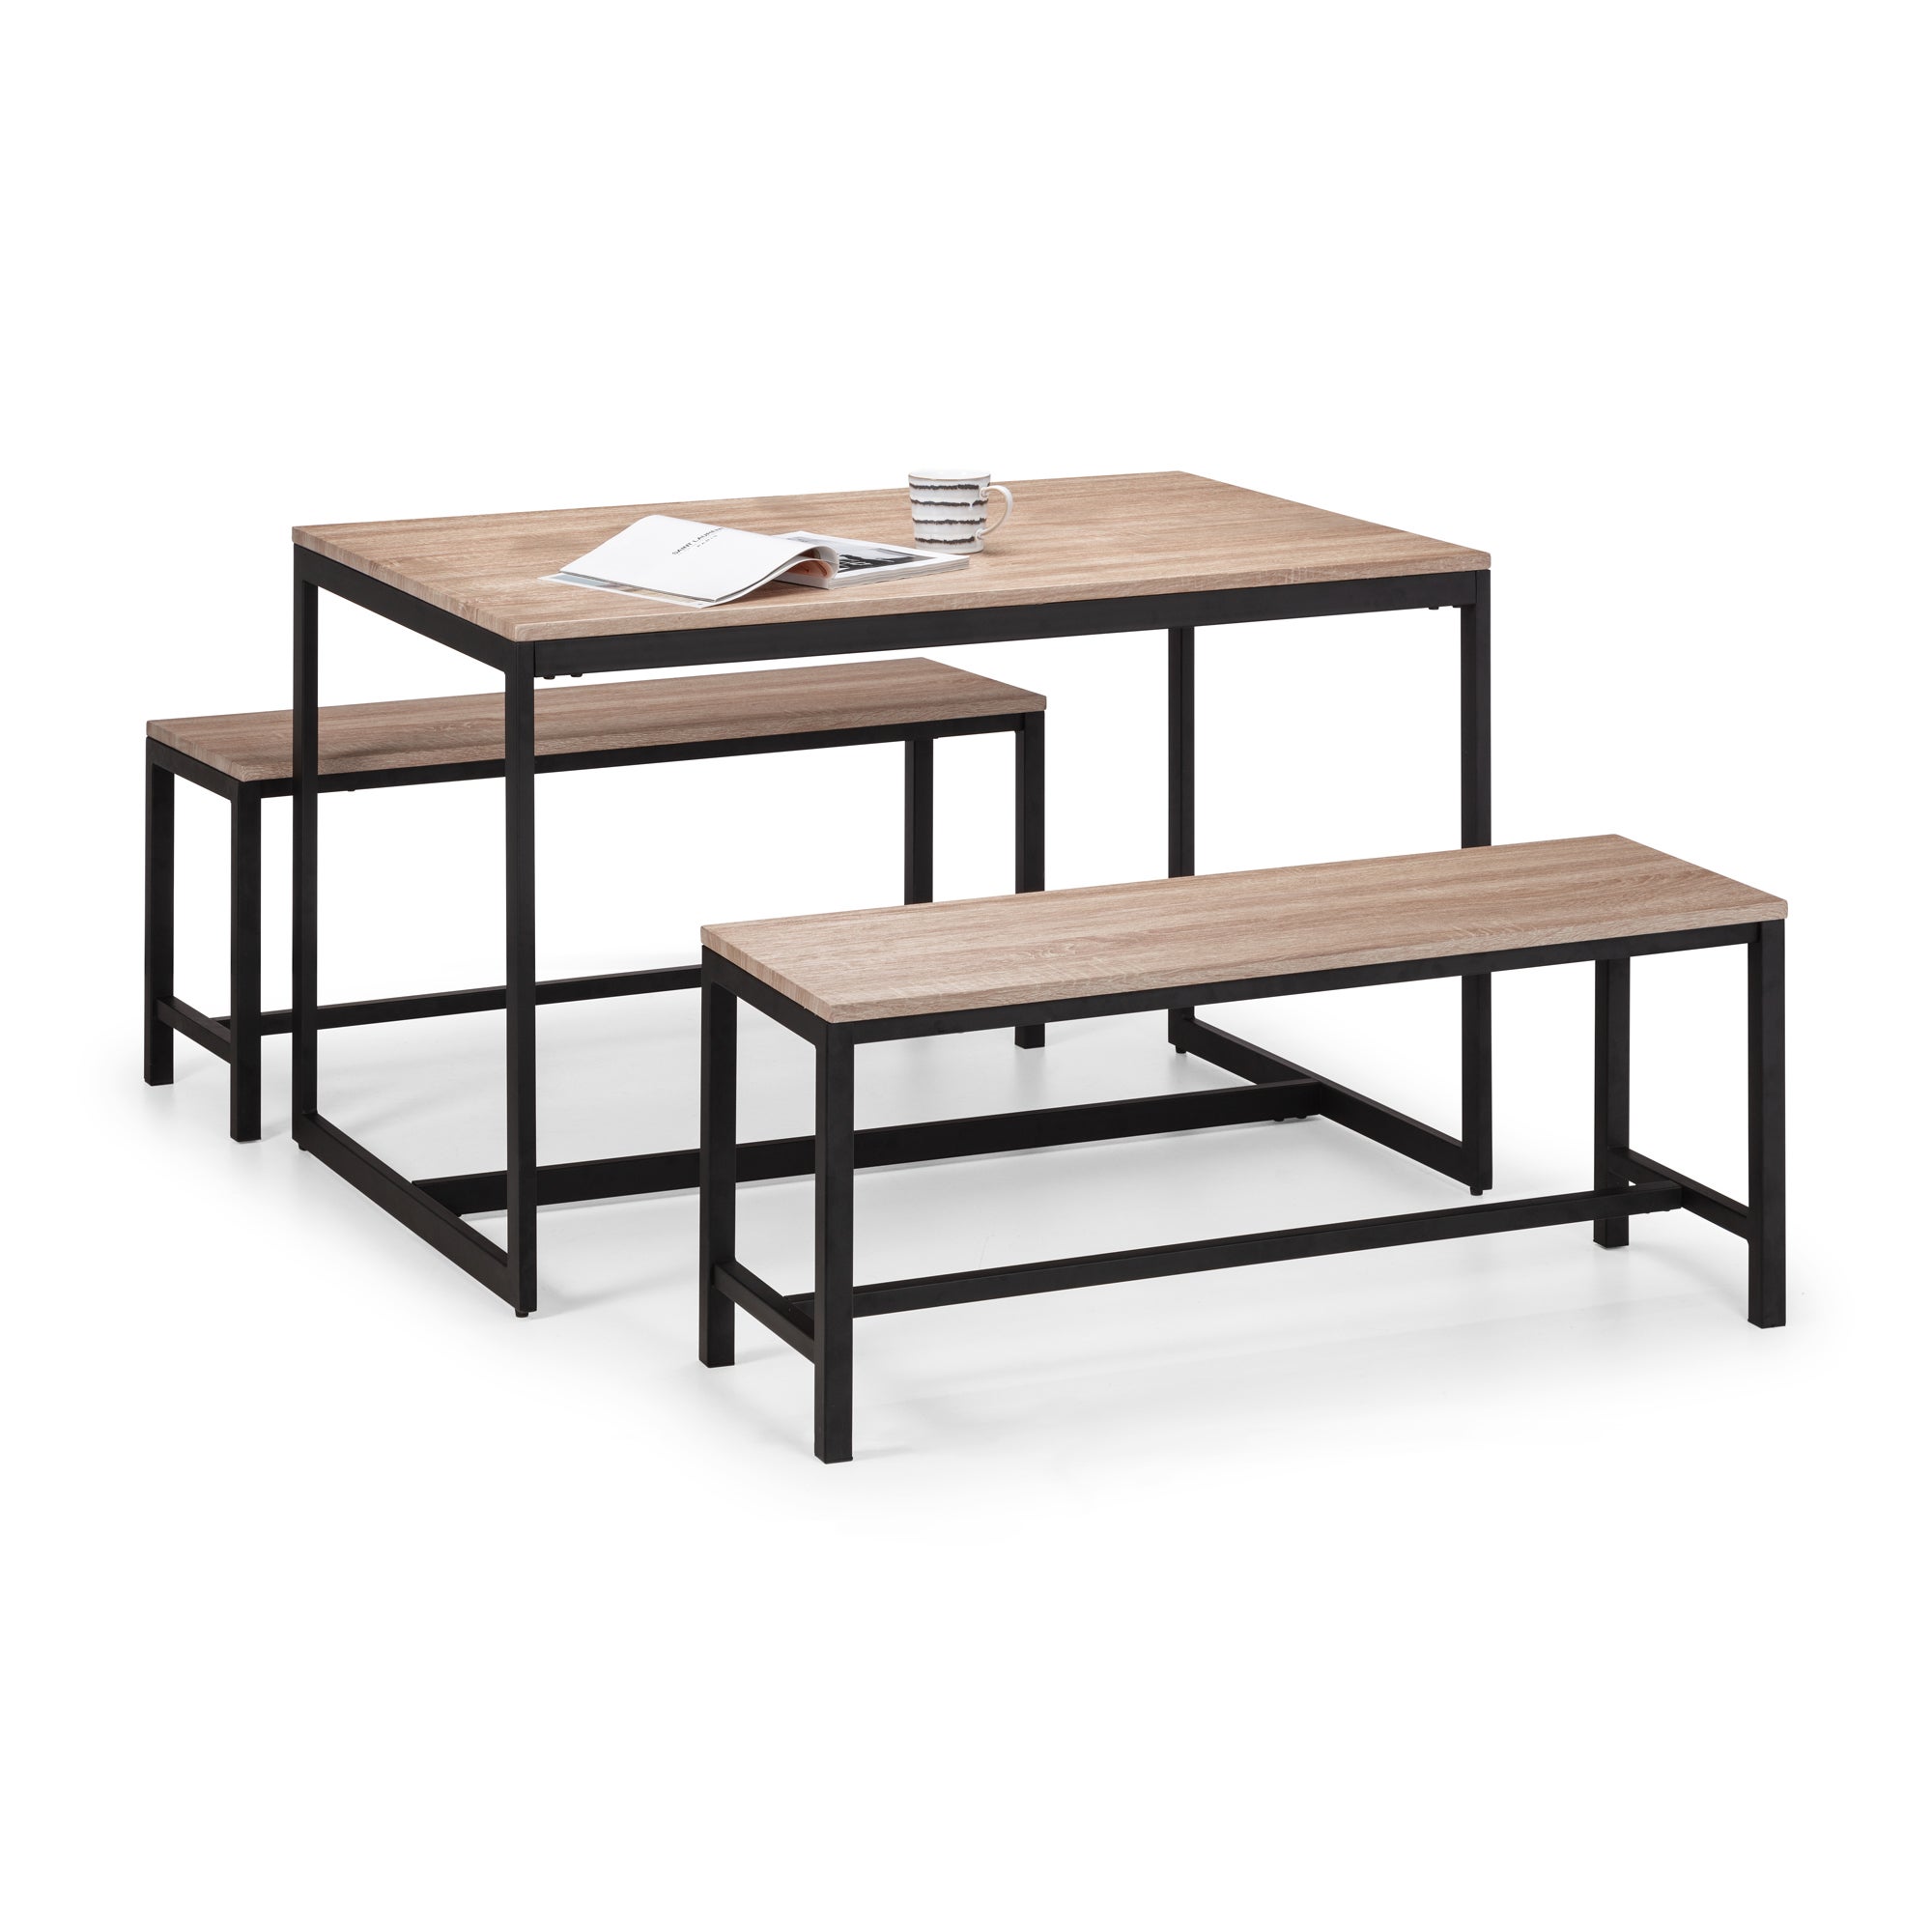 Tribeca Rectangular Dining Table with 2 Benches, Black